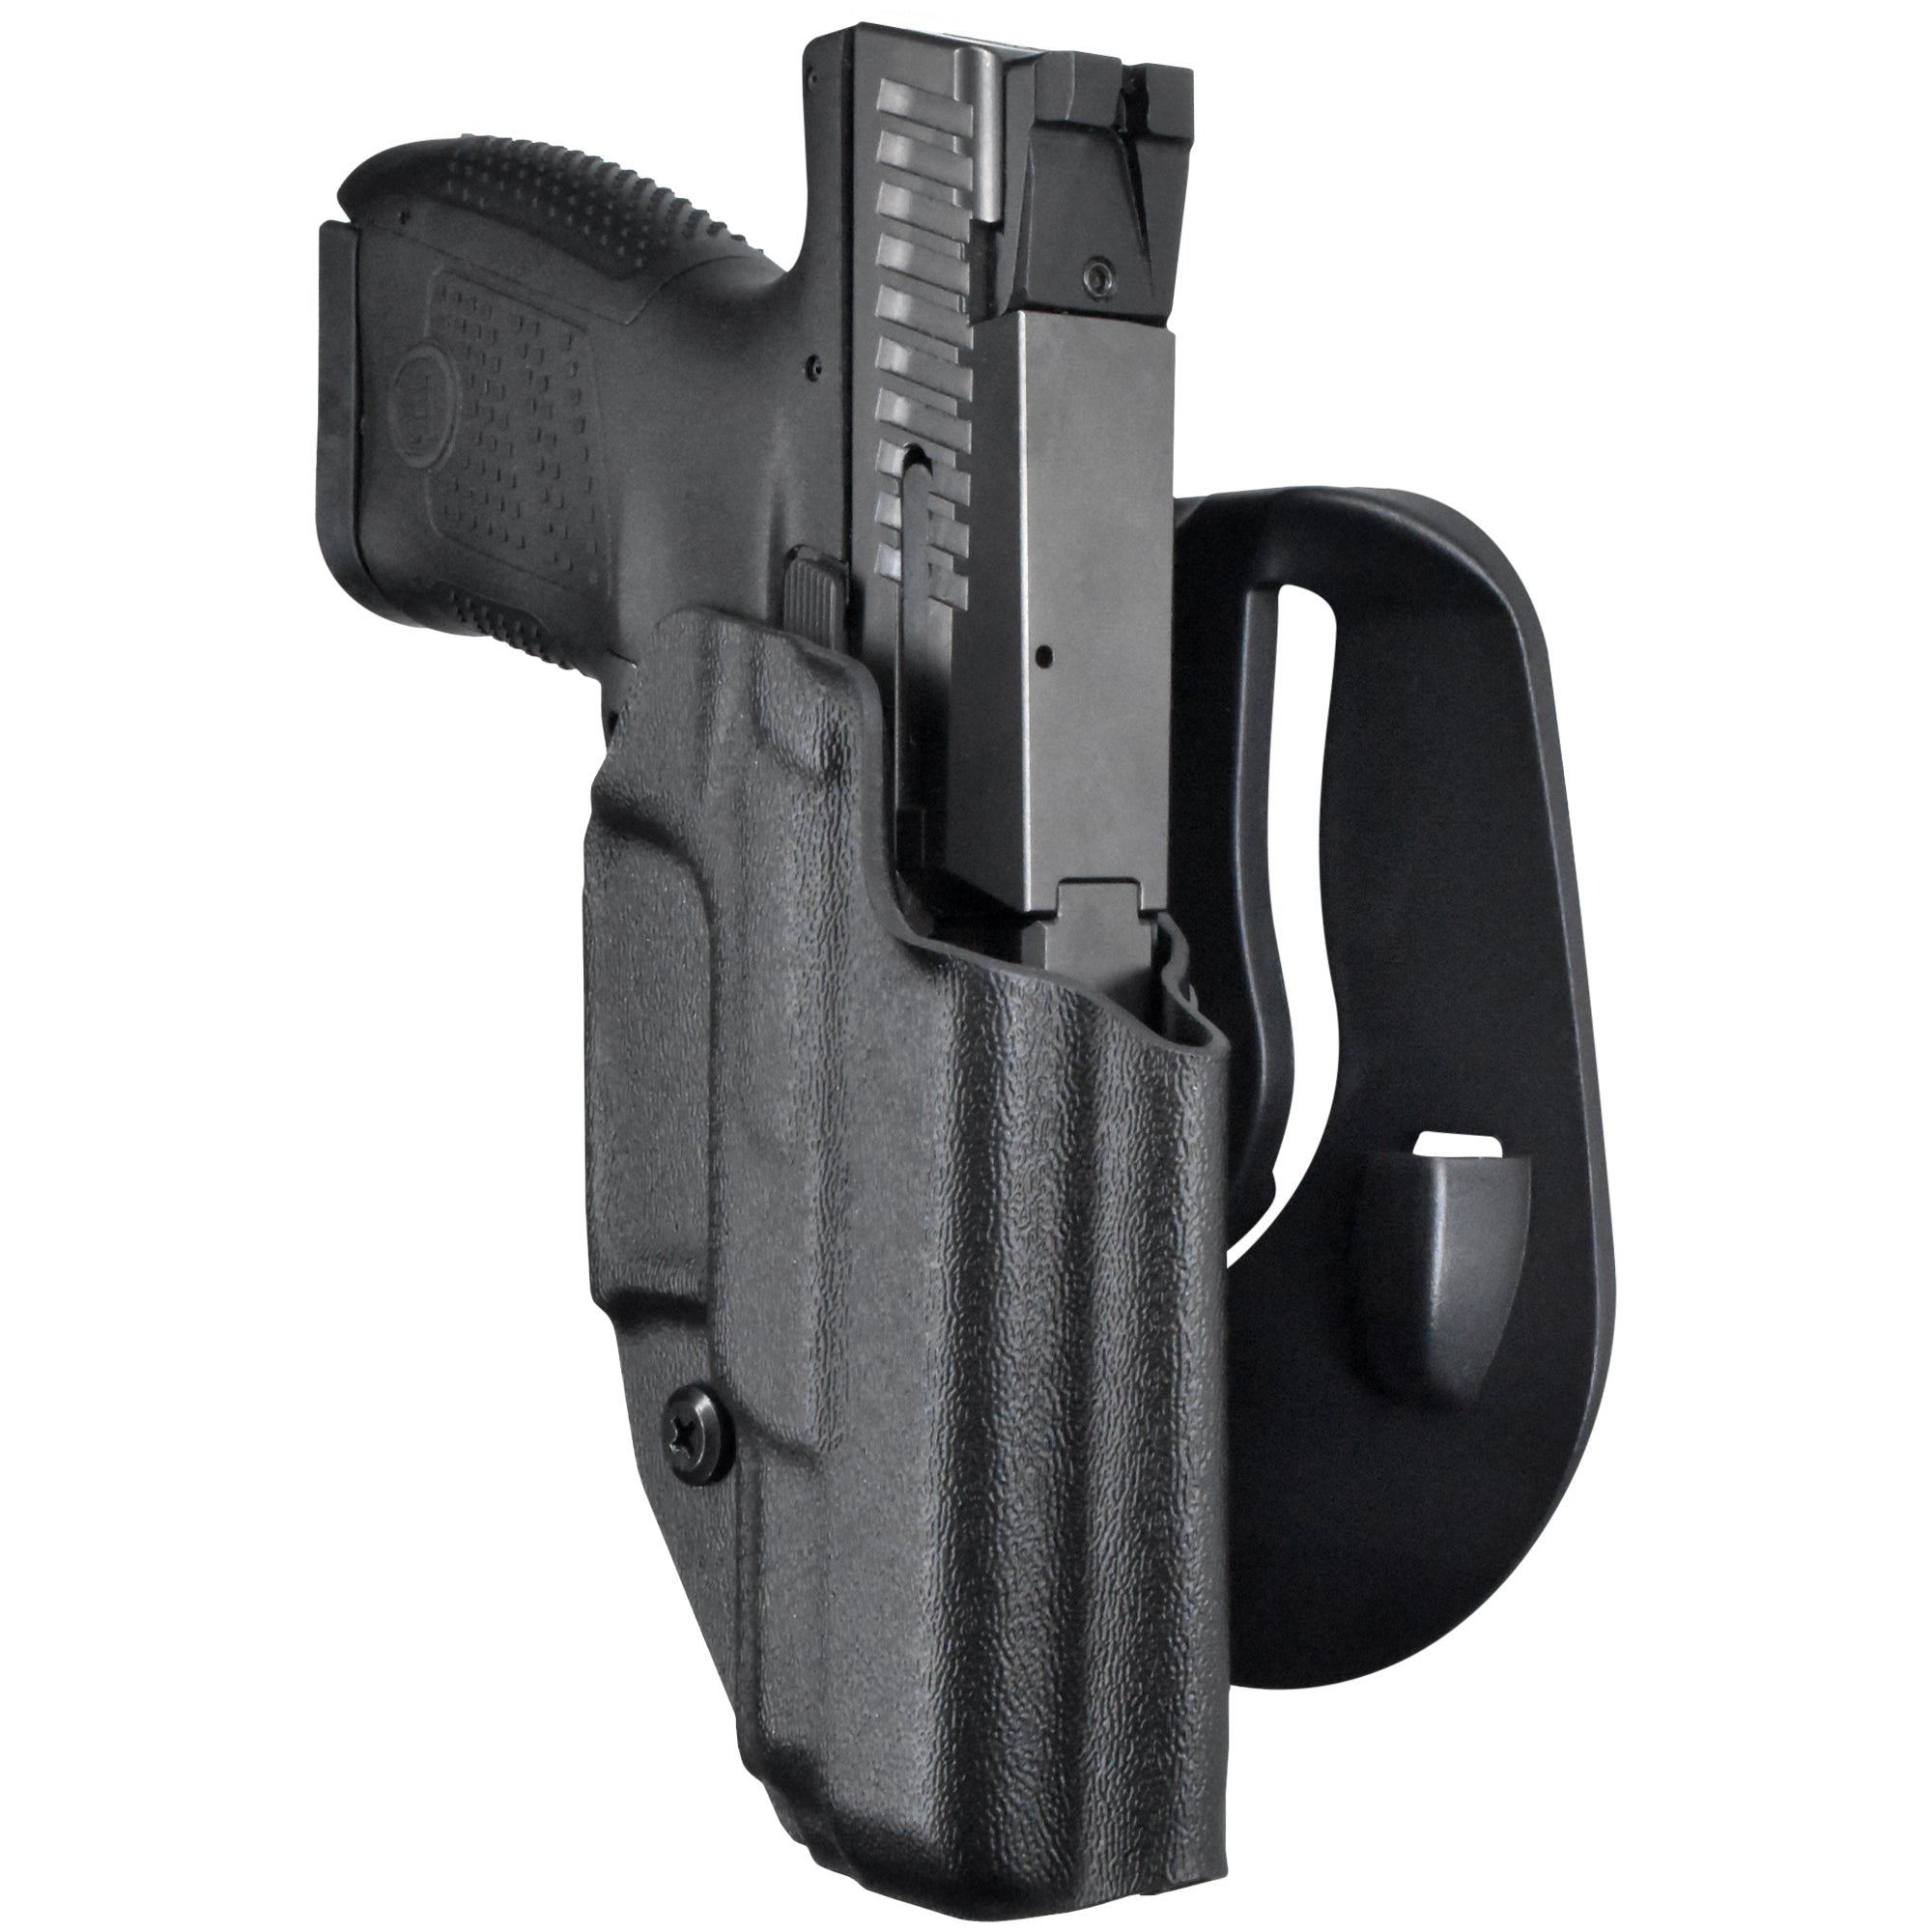 CZ P-10 S OWB Paddle Holster